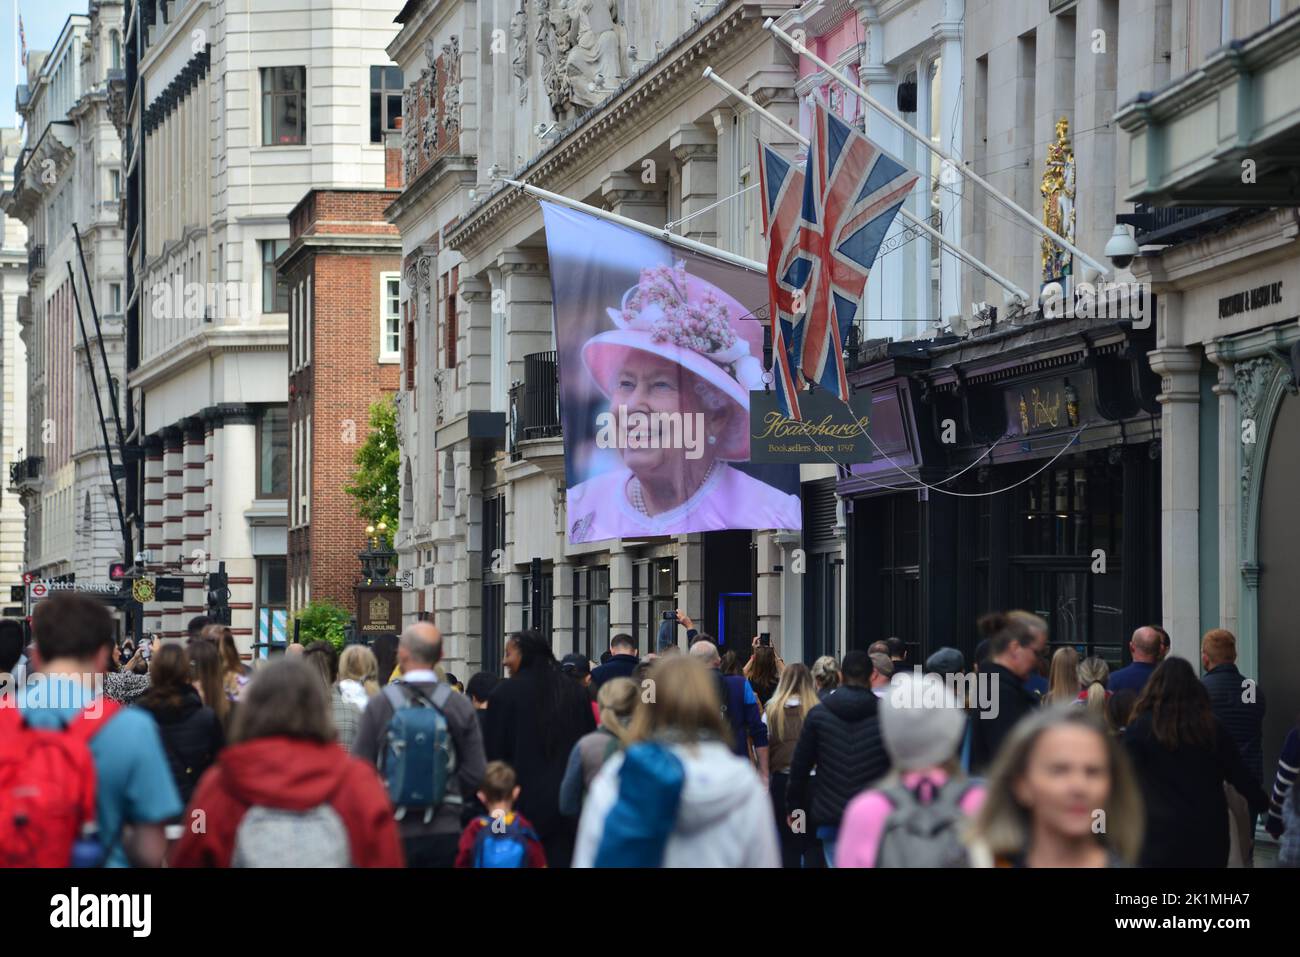 State funeral of Her Majesty Queen Elizabeth II, London, UK, Monday 19th September 2022. Picture tribute of Her Majesty the Queen and Union Jacks hanging outside a business on Piccadilly. Stock Photo